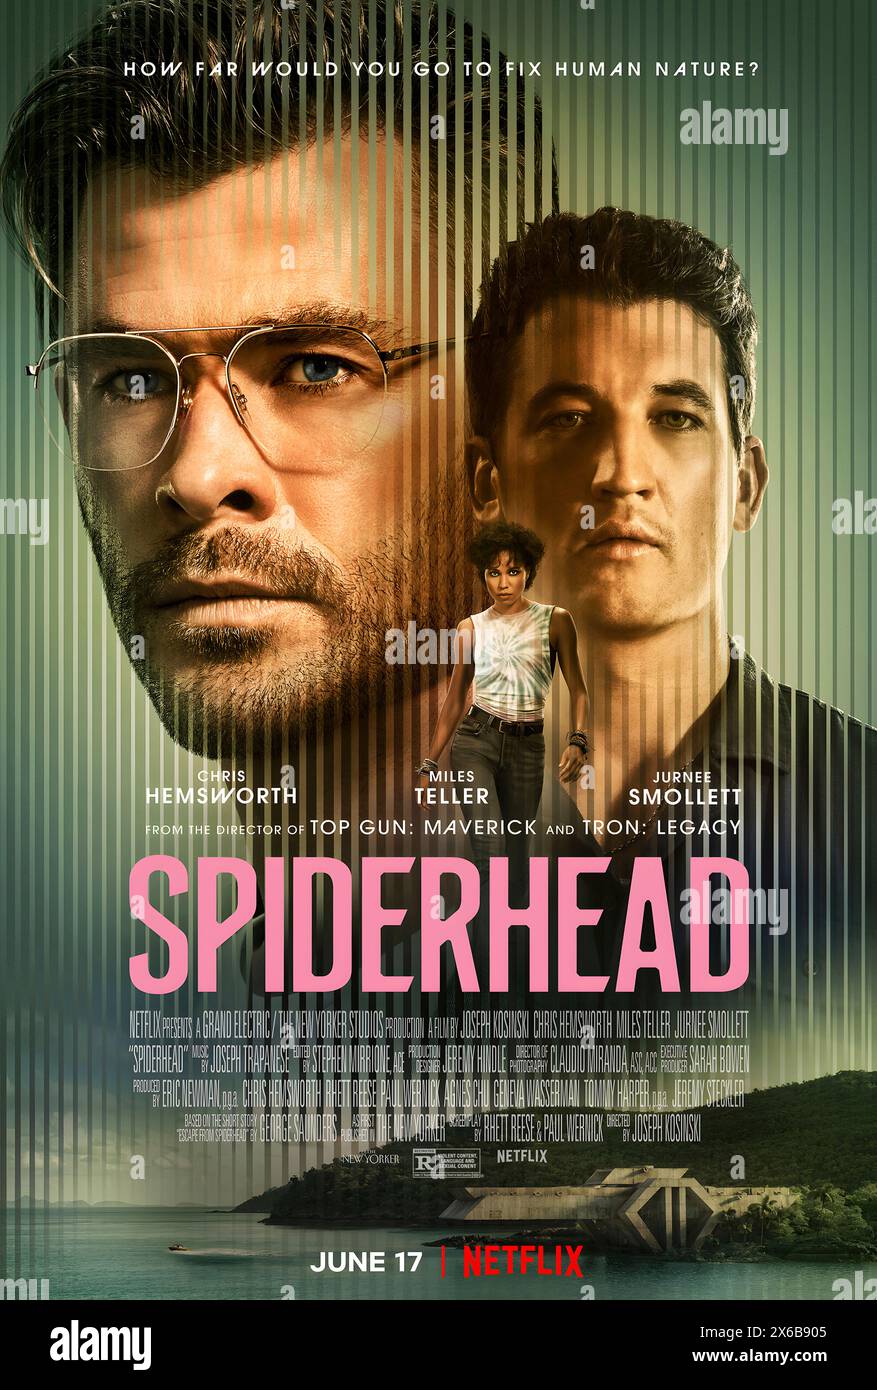 Spiderhead (2022) directed by Joseph Kosinski and starring Chris Hemsworth, Miles Teller and Jurnee Smollett. In the near future, convicts are offered the chance to volunteer as medical subjects to shorten their sentence. One such subject for a new drug capable of generating feelings of love begins questioning the reality of his emotions. US one sheet poster.***EDITORIAL USE ONLY*** Credit: BFA / Netflix Stock Photo